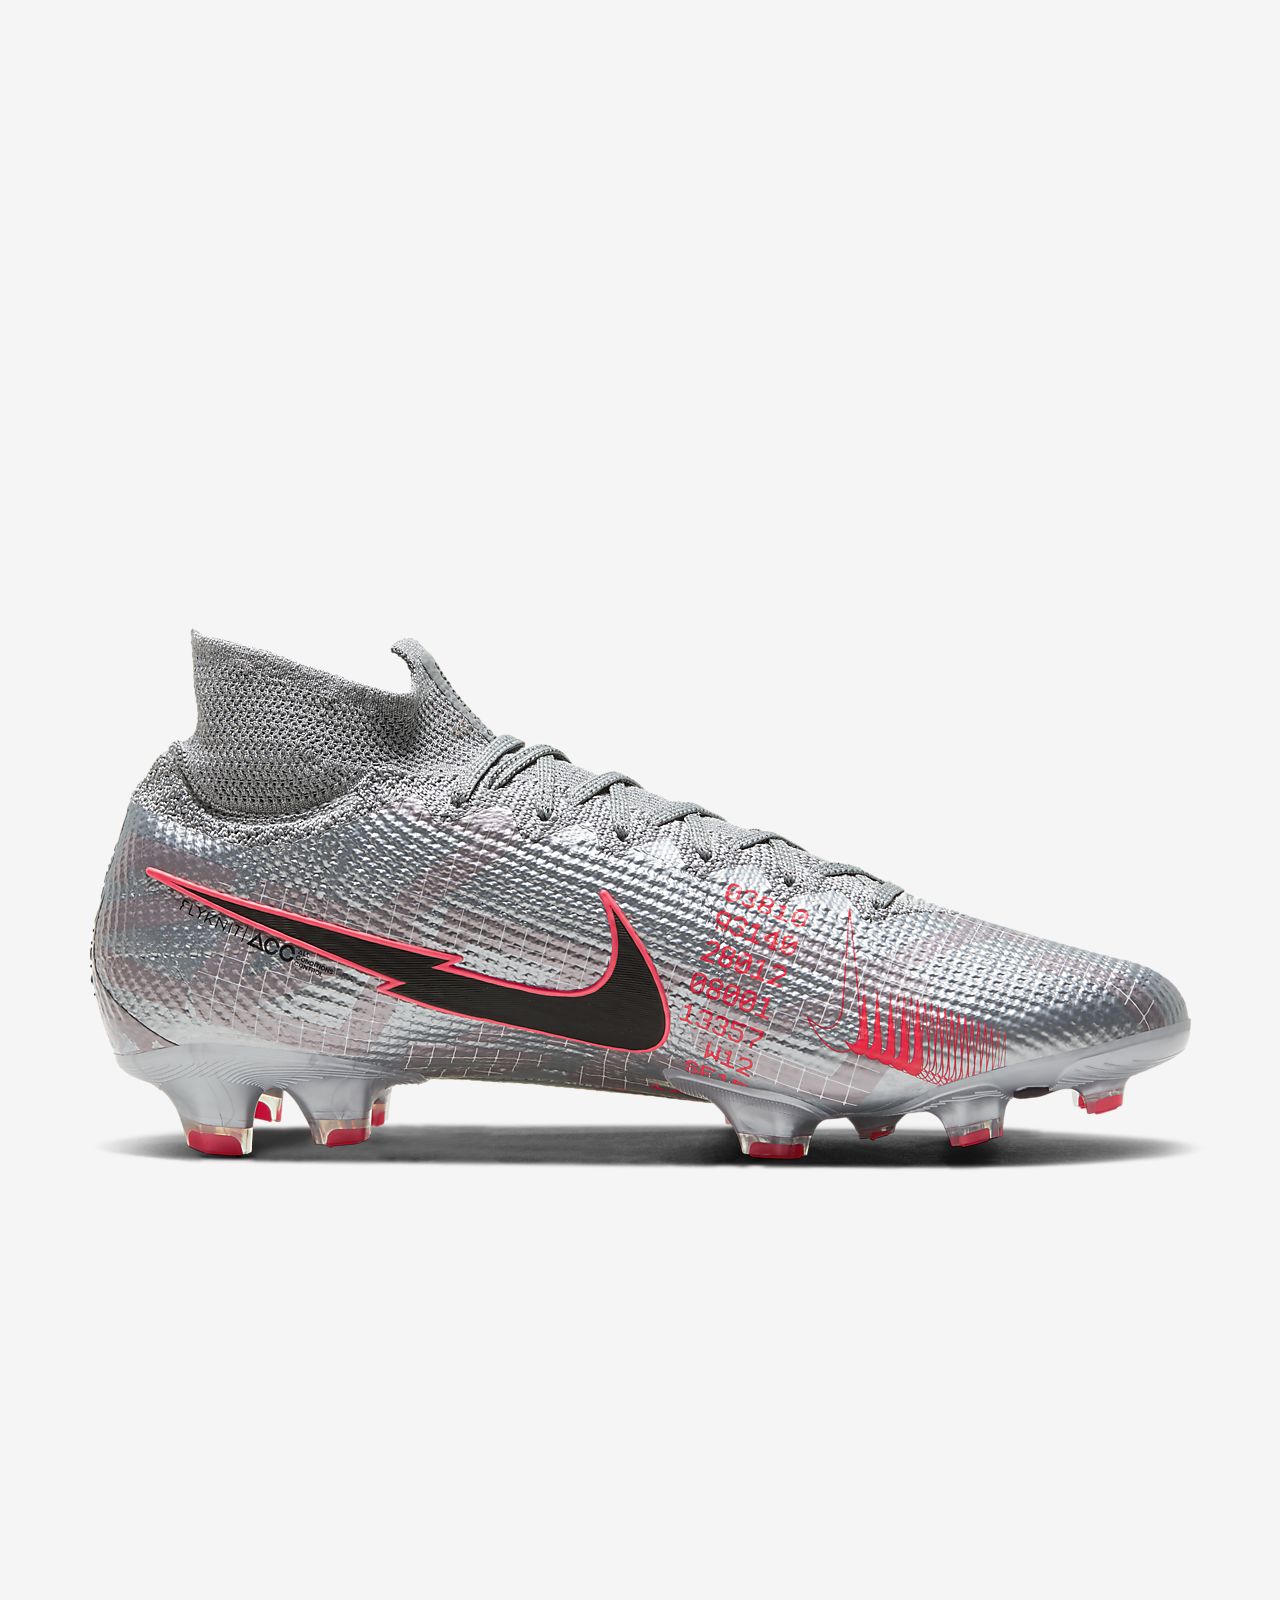 Nike Mercurial Superfly 7 Academy FG MG Soccer Cleats.